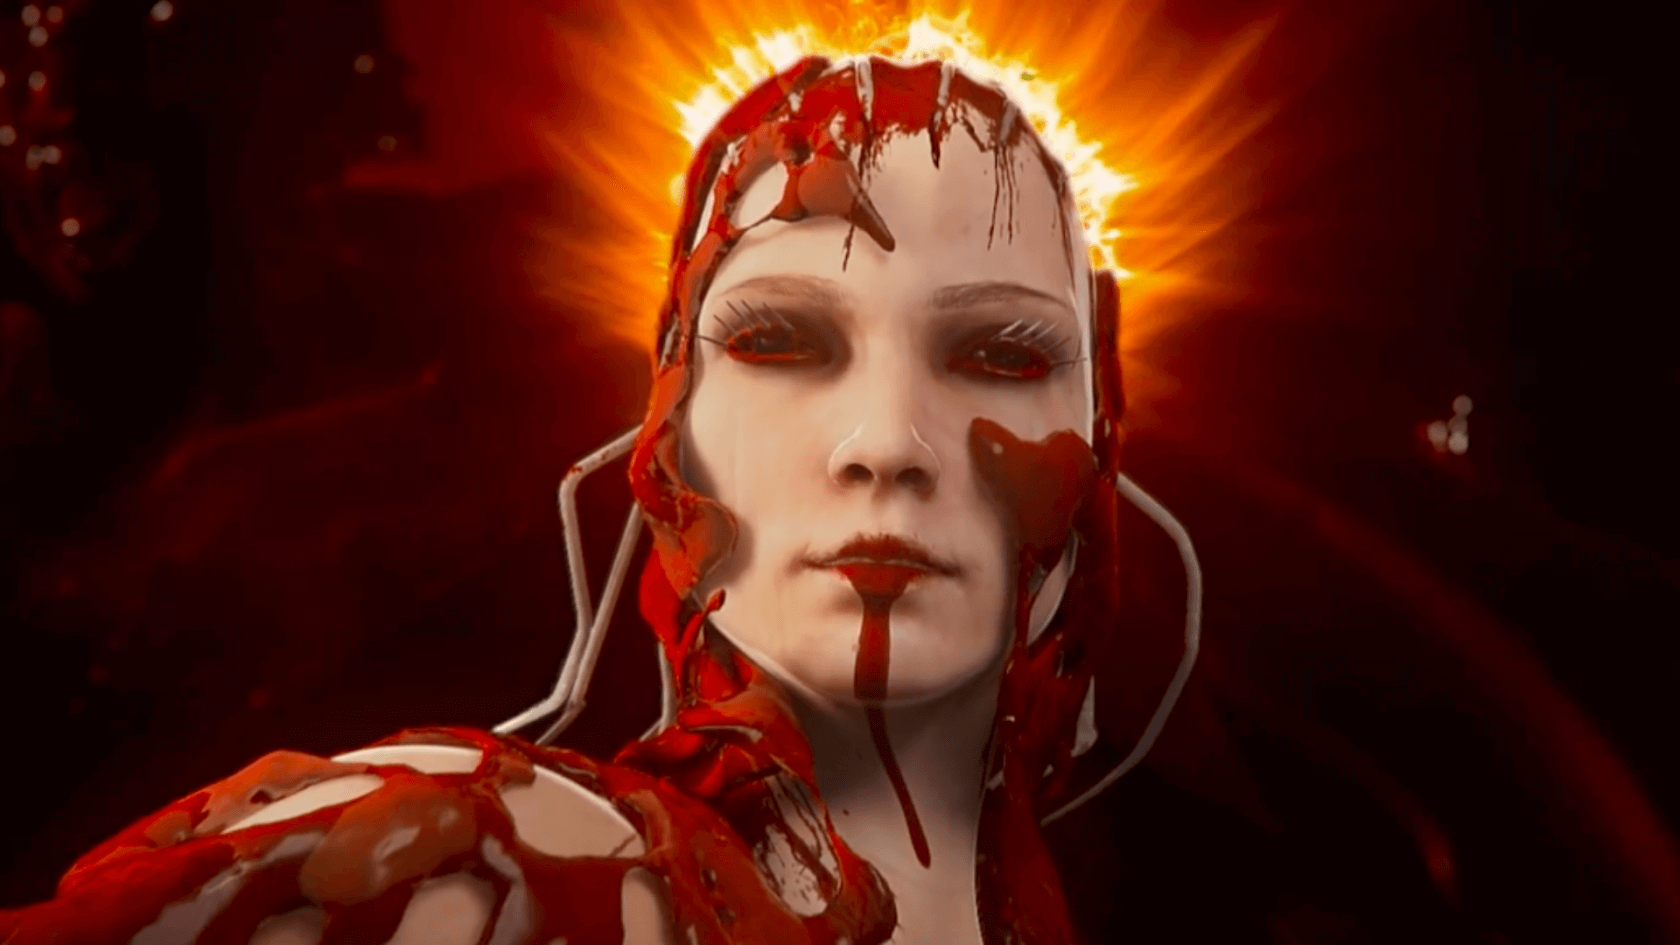 Agony studio reveals its financial problems, cancels unrated version of game